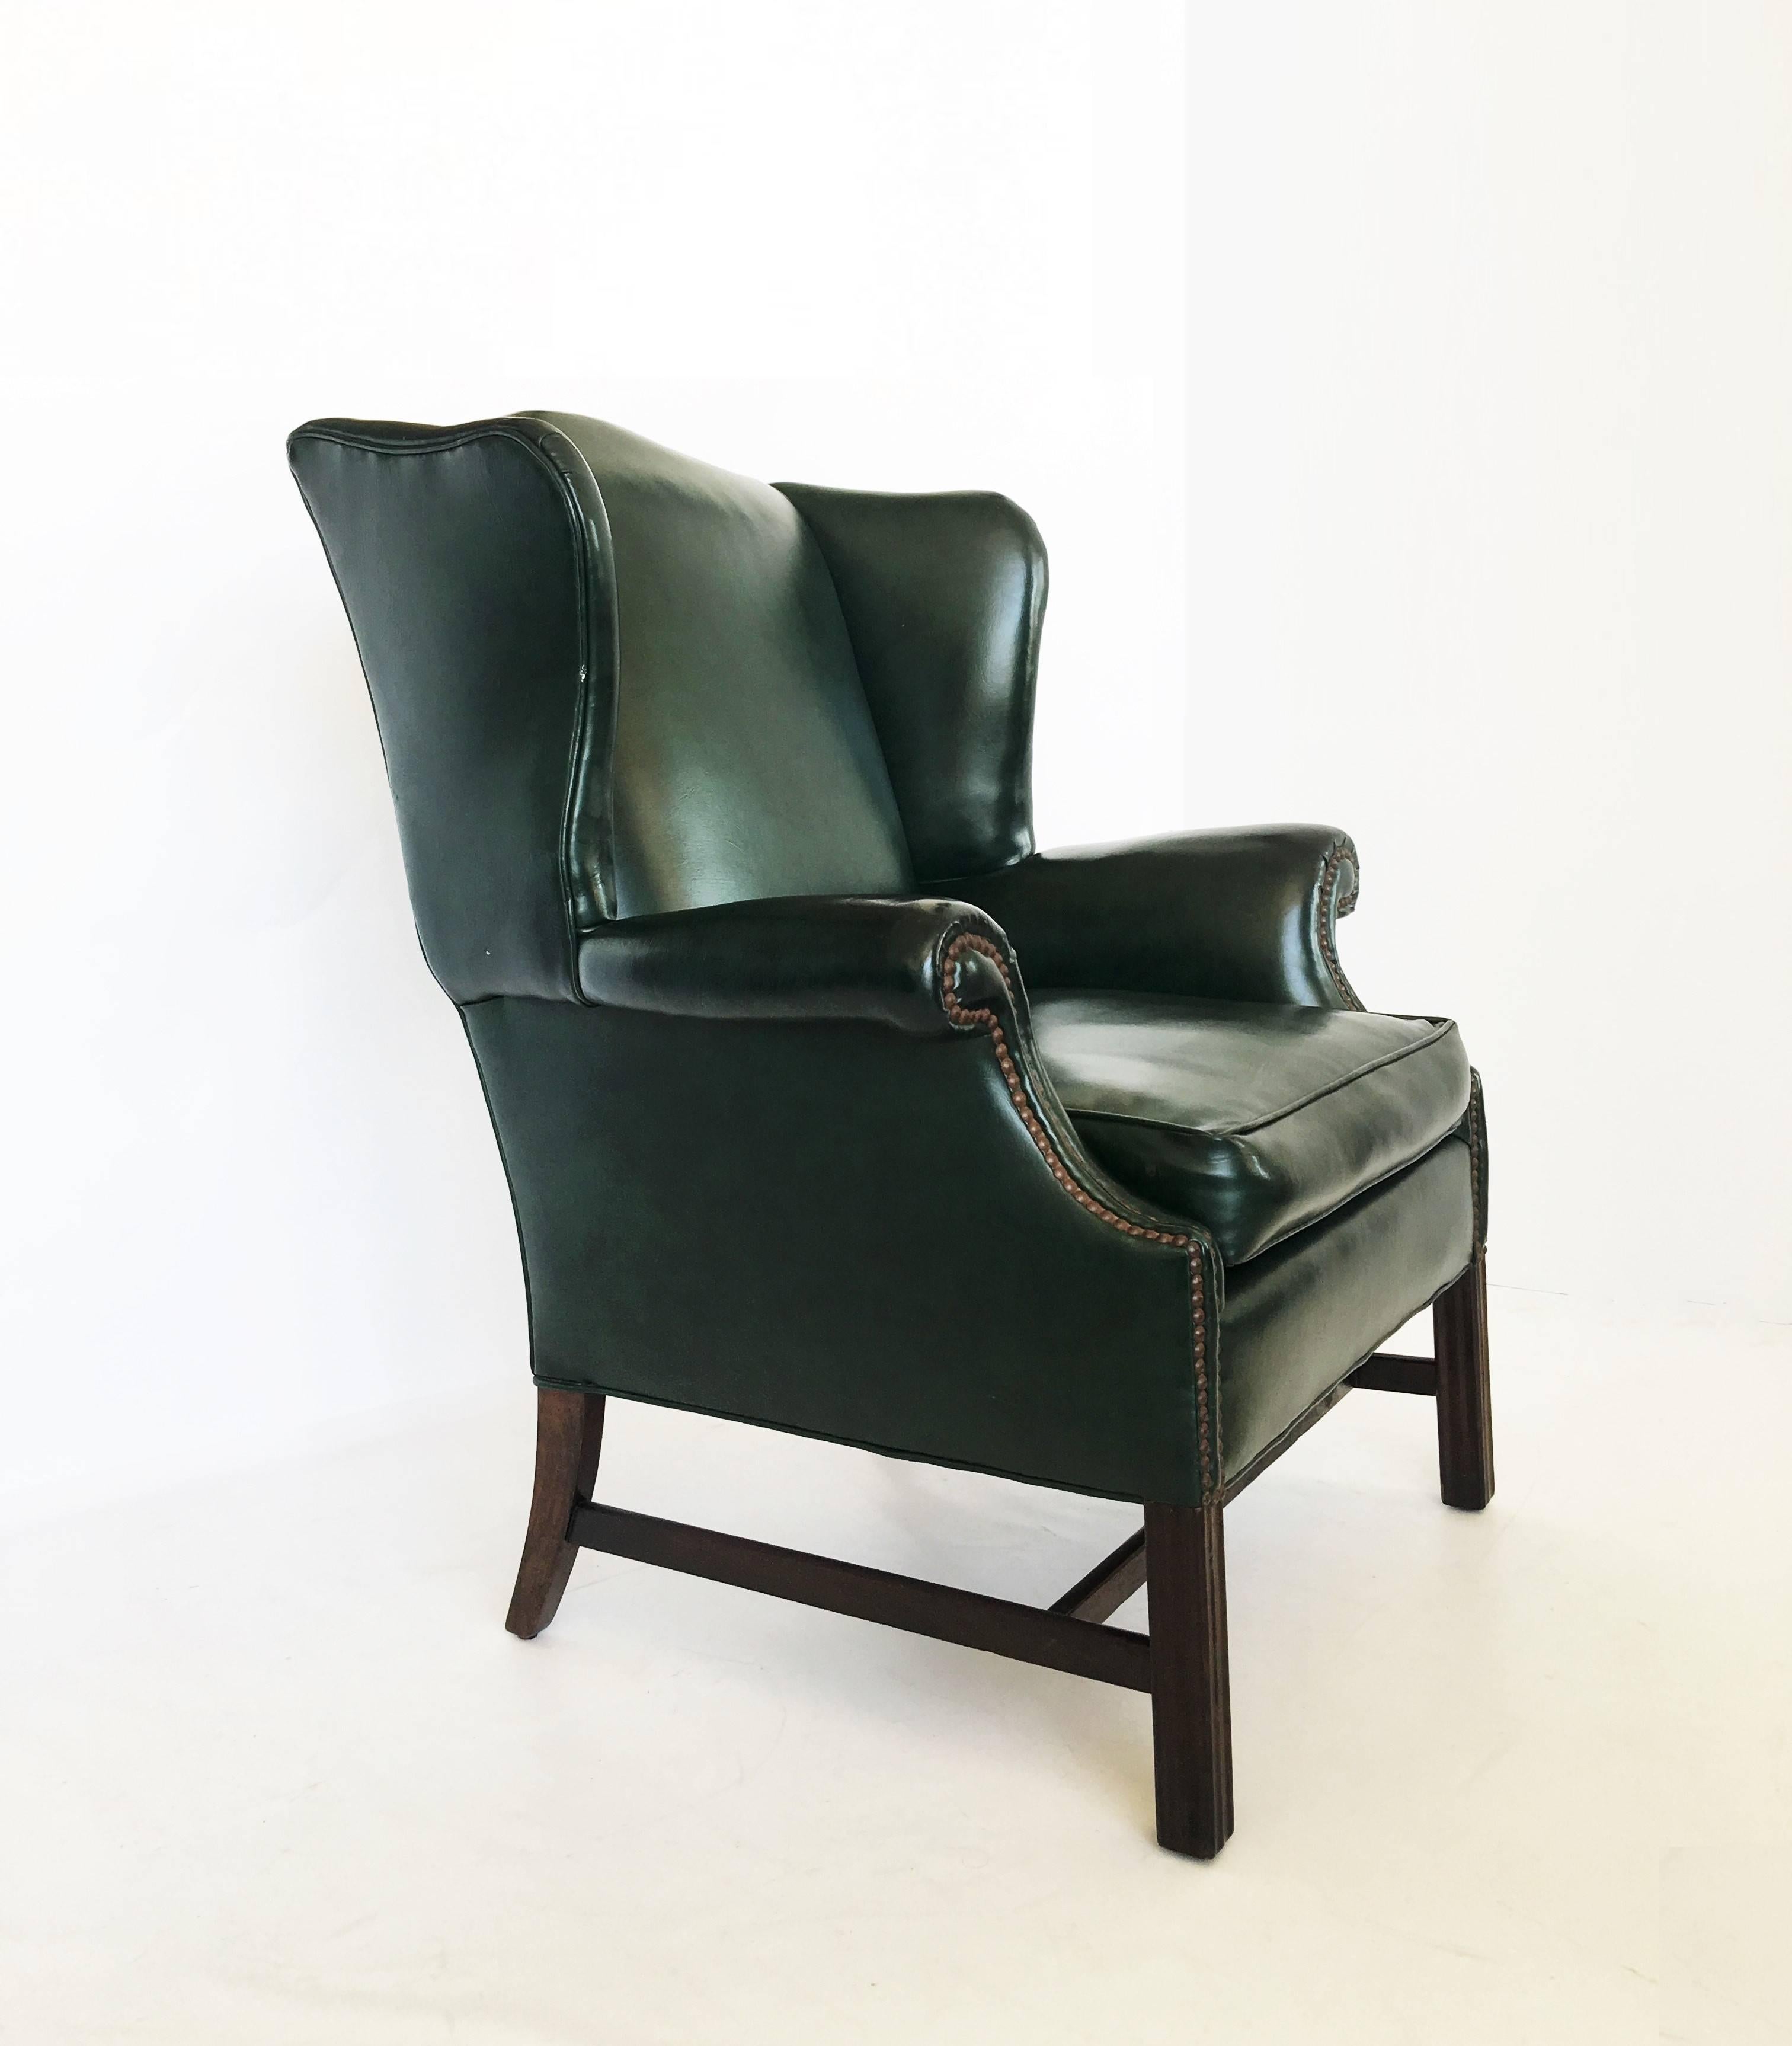 English Pair of Chesterfield Tufted Dark Green Leather Wingback Chairs For Sale